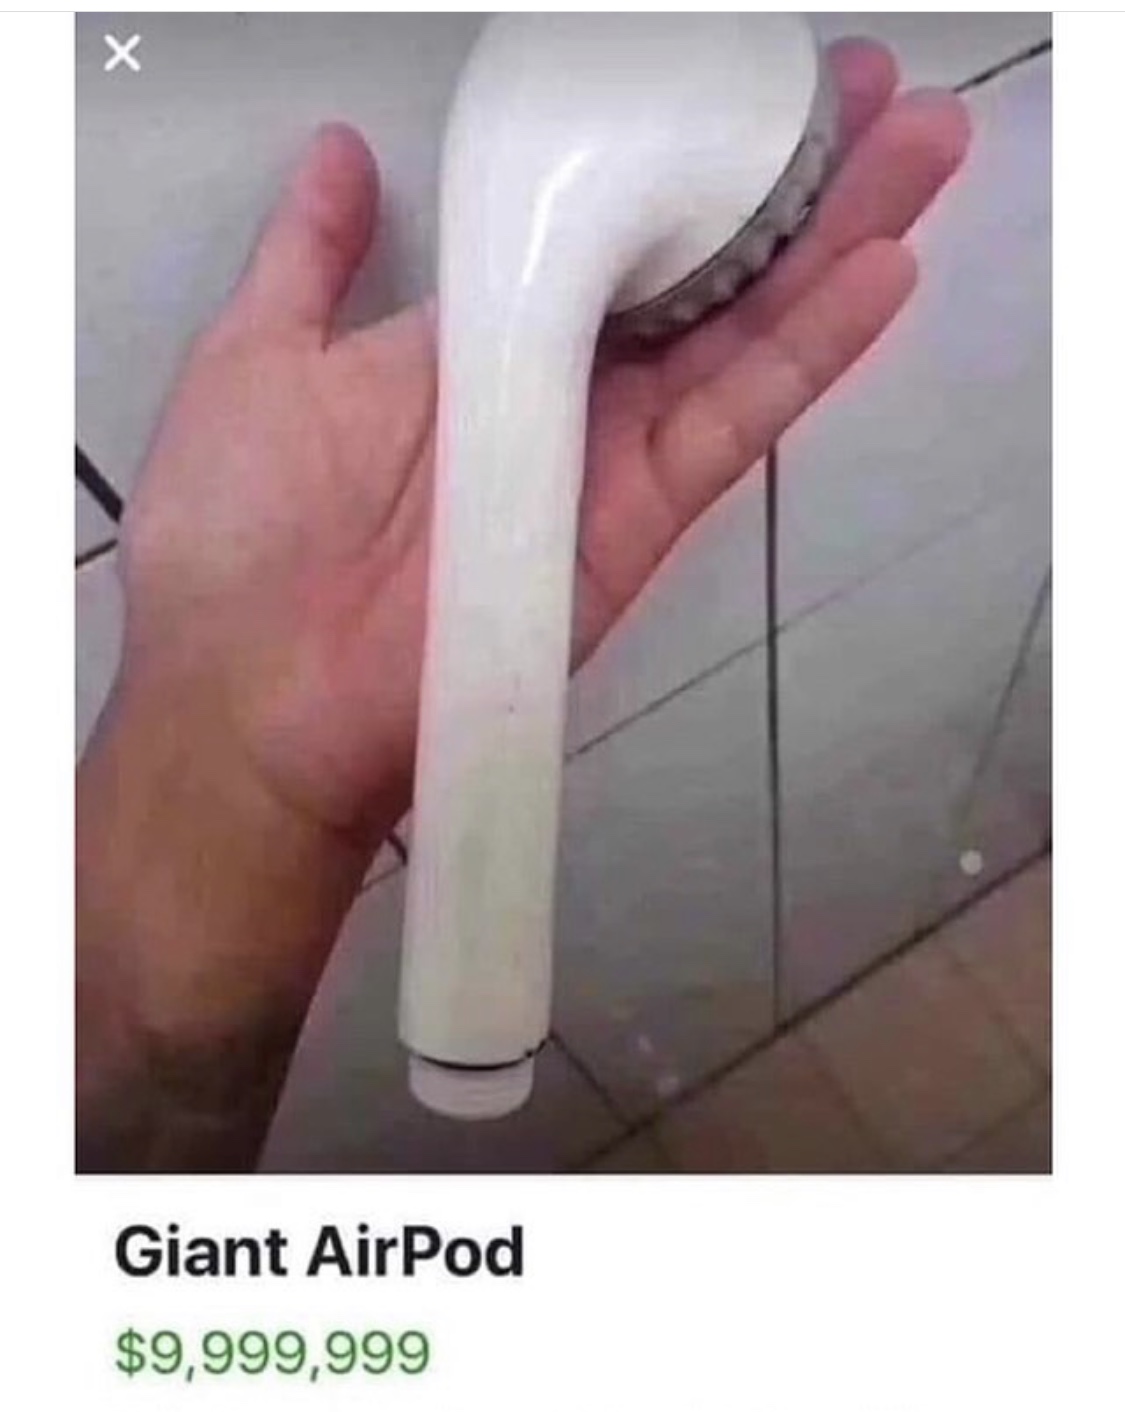 giant airpod funny picture, giant airpod picture, shower head as airpod, shower head as airpod funny picture, giant airpod for sale, giant airpod for sale funny picture